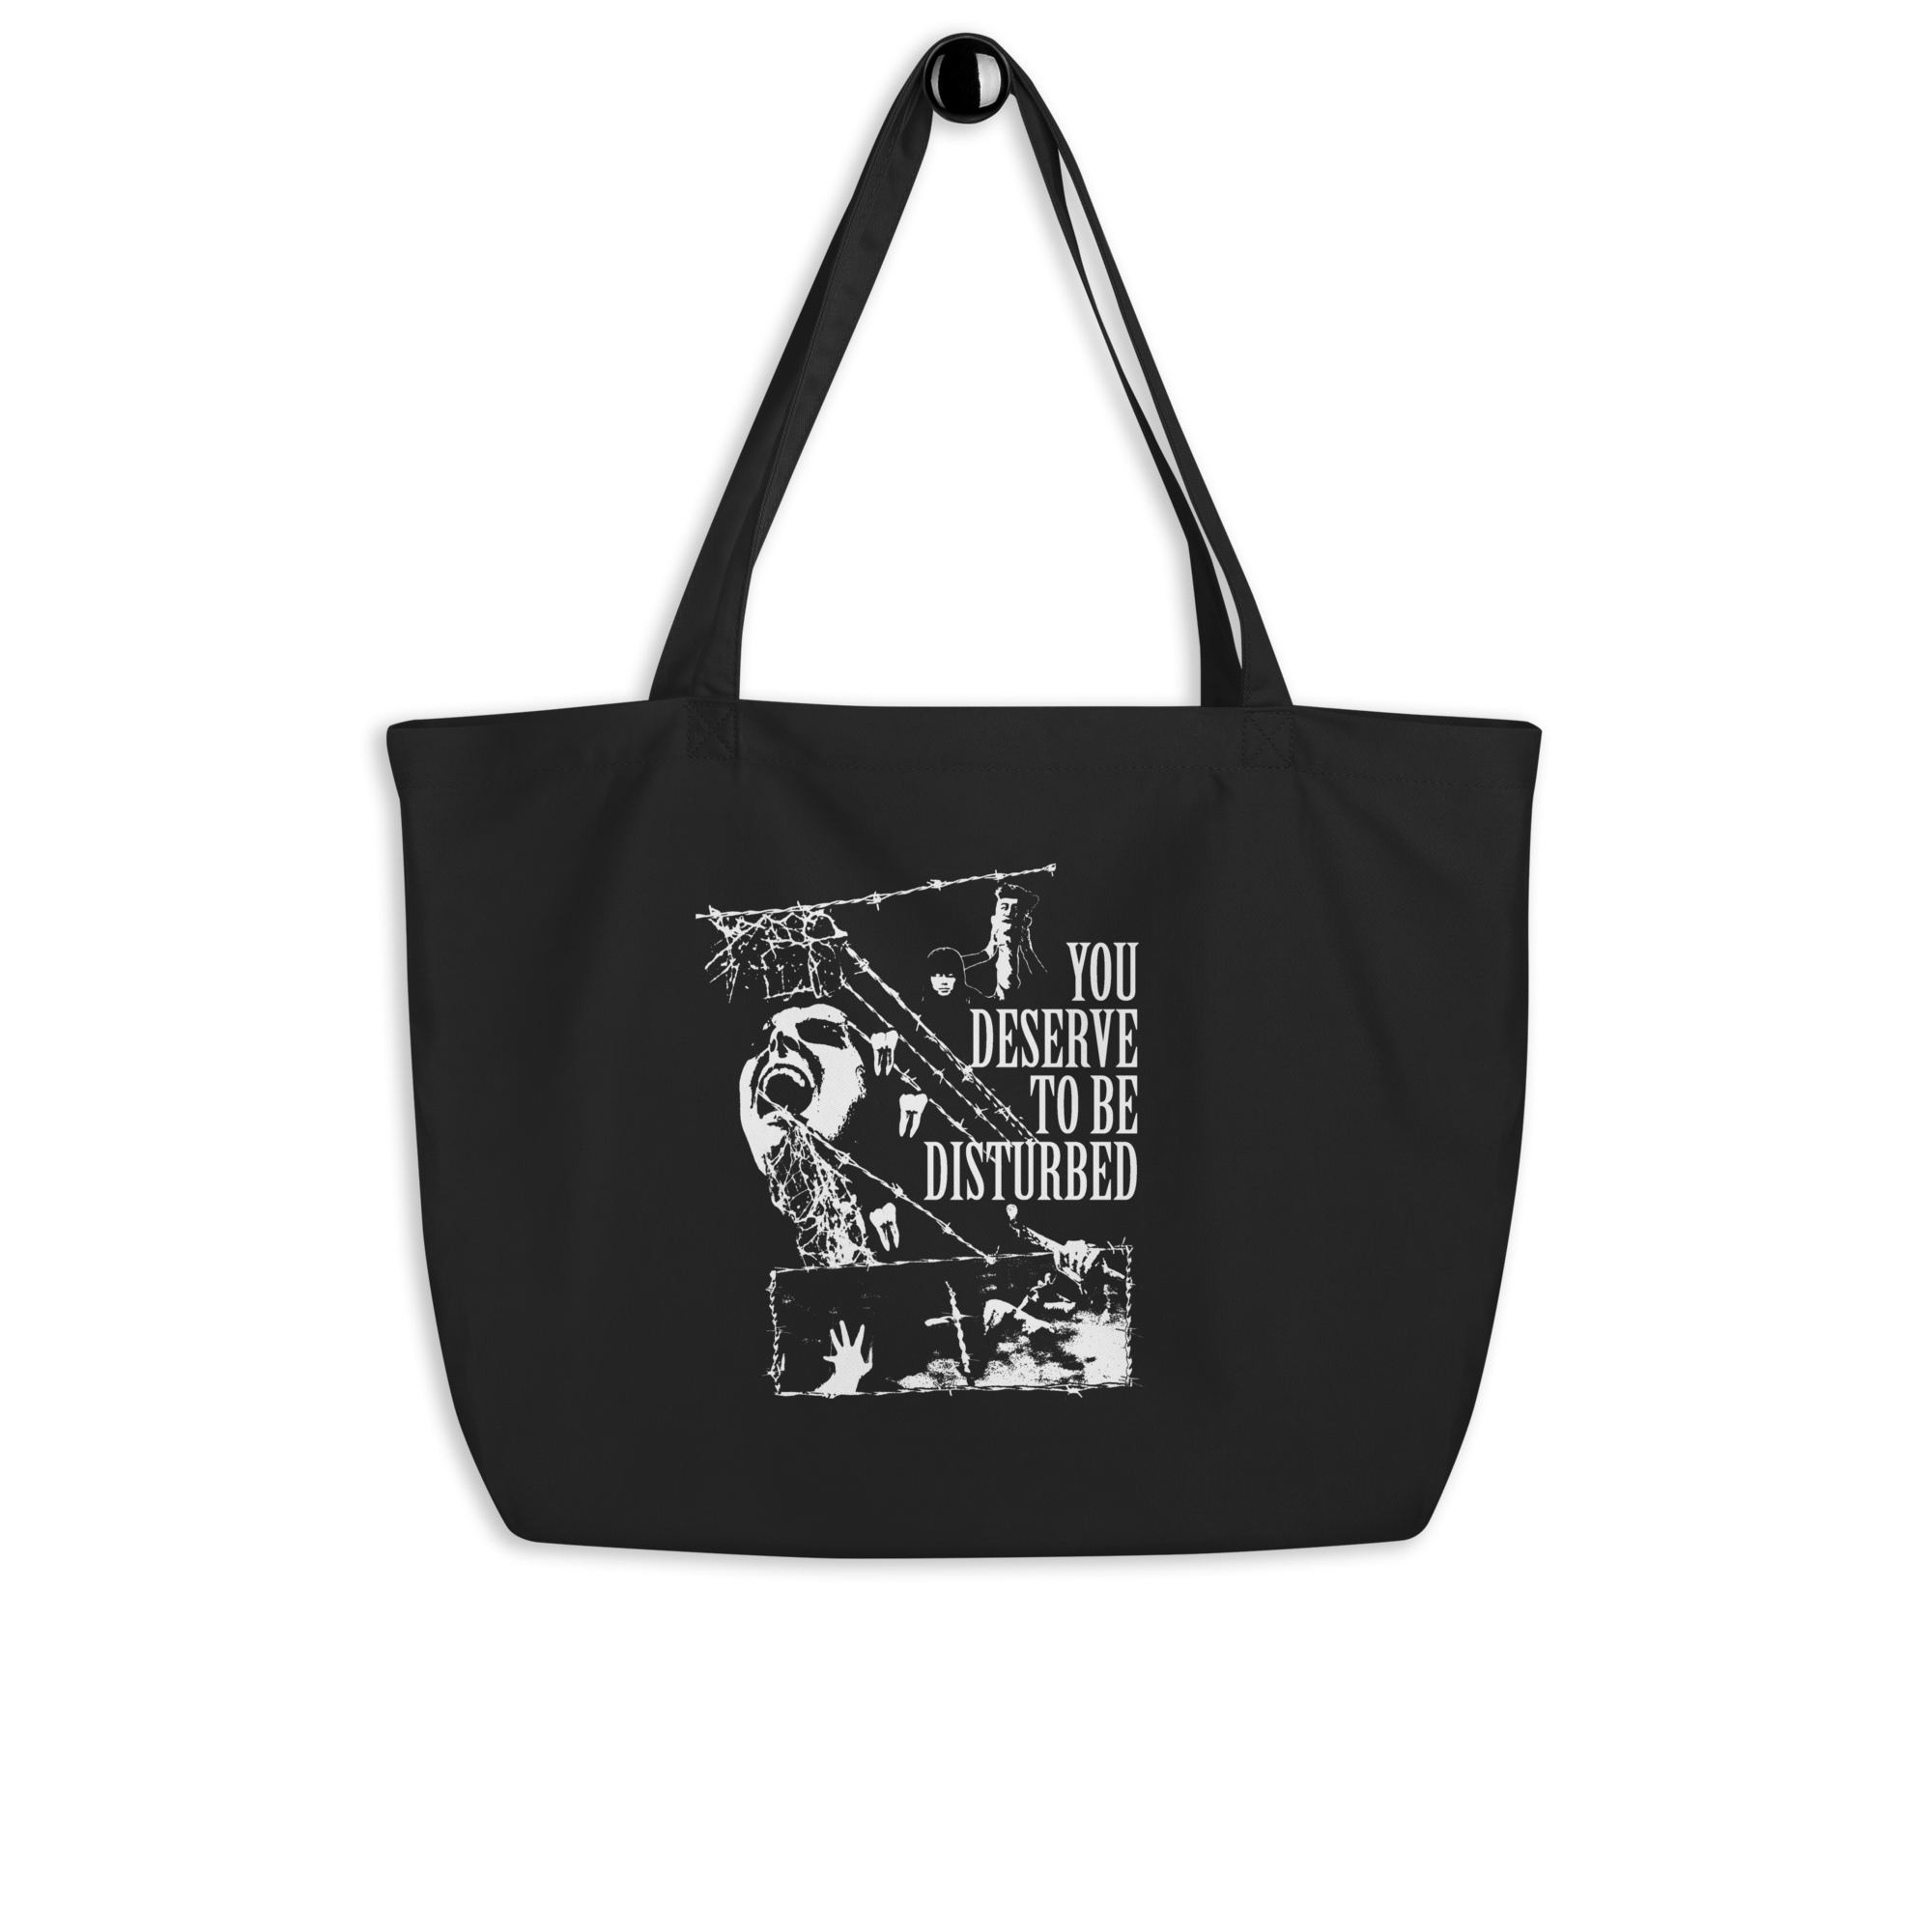 ALTER Collage of Pain Large Organic Tote Bag